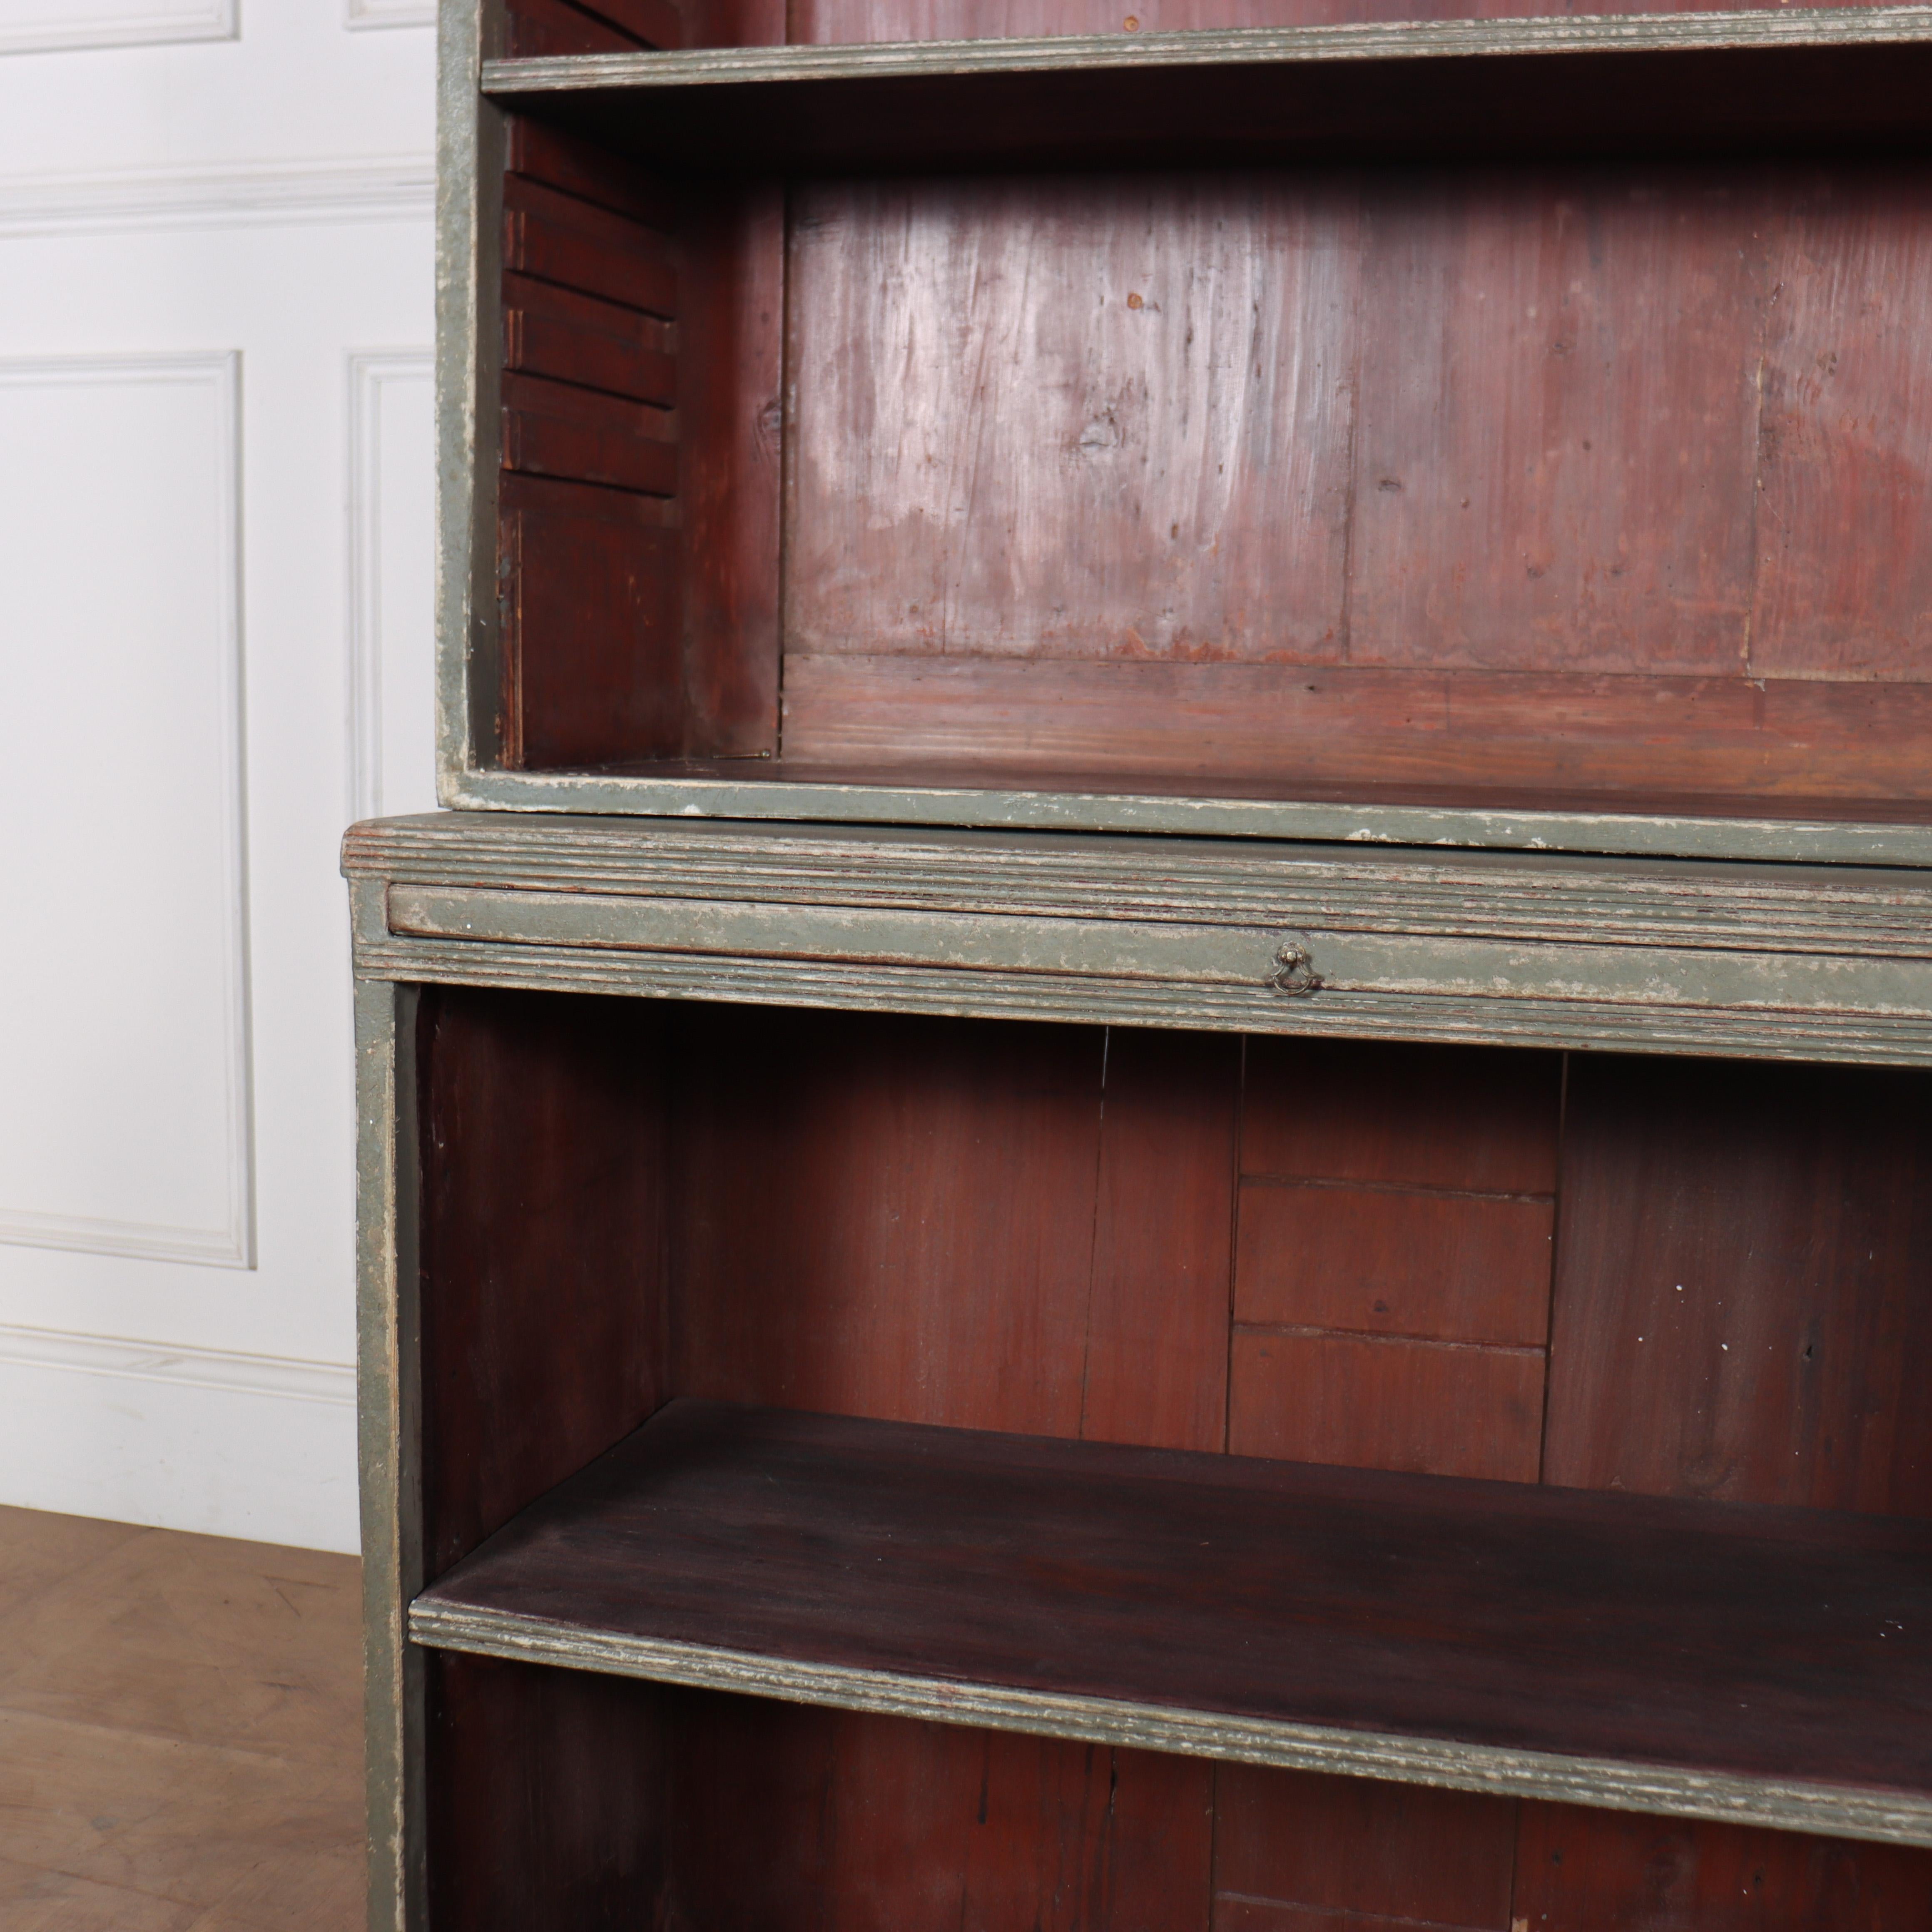 Wonderful early 19th C English painted pine open library bookcase with two brushing slides. 1820.

Reference: 7977

Dimensions
71 inches (180 cms) Wide
15.5 inches (39 cms) Deep
93.5 inches (237 cms) High
Shelf depth - Upper section is 10